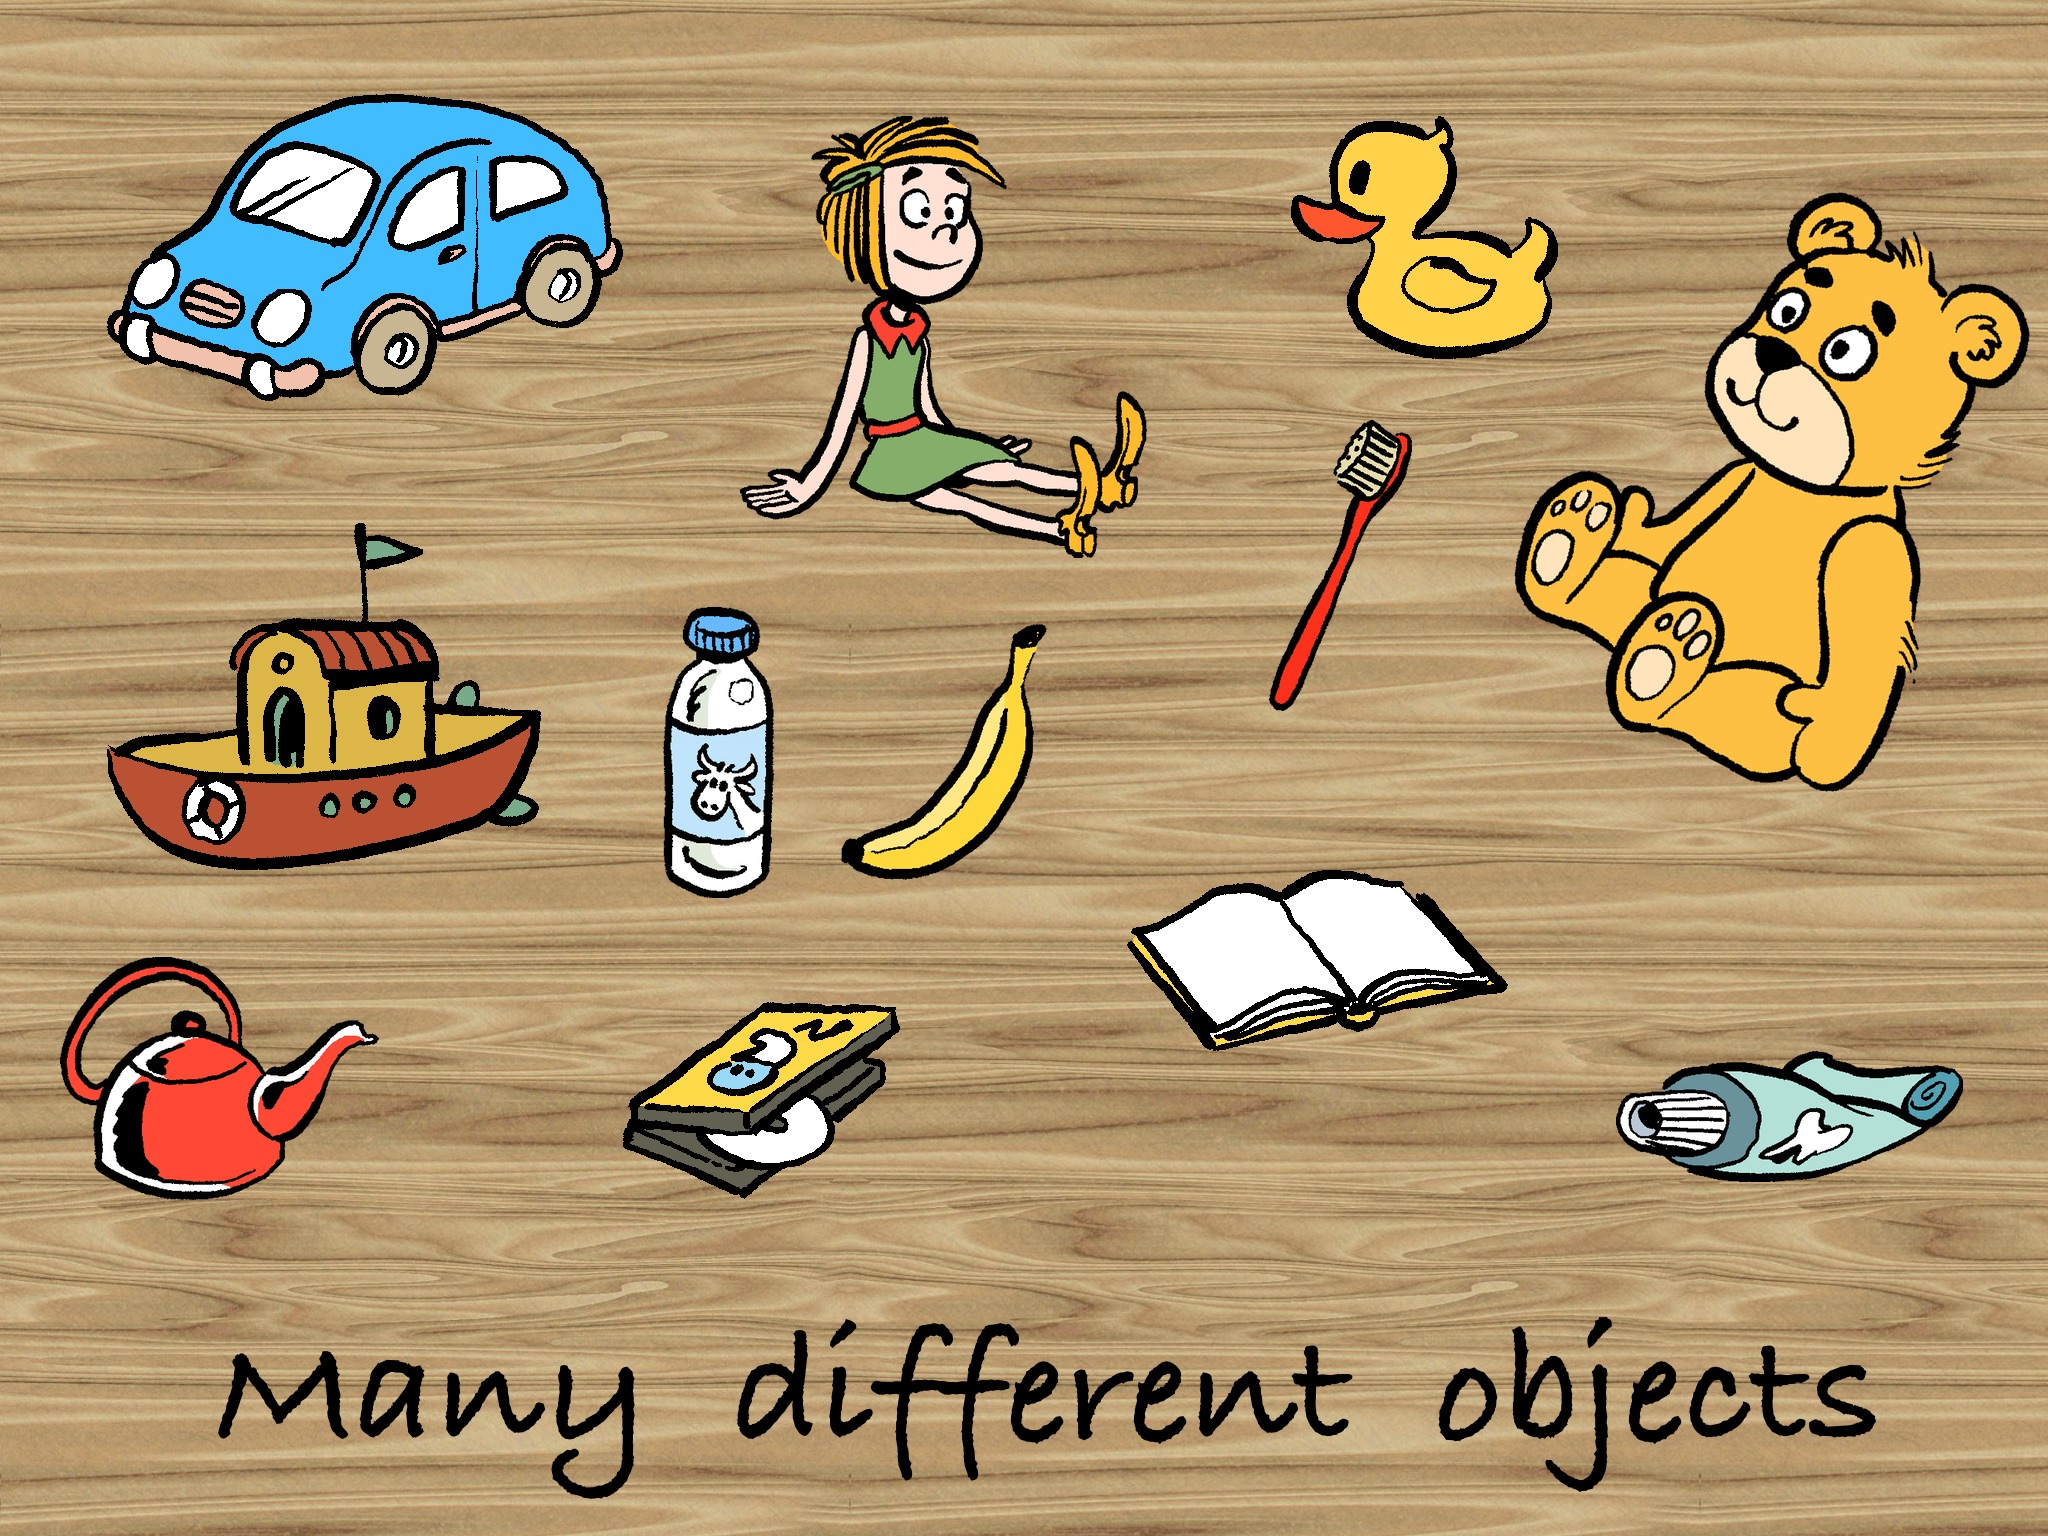 TidyUp! clean the room & house - best free puzzle educational games for kids or your toddler (learn & teach) screenshot 4